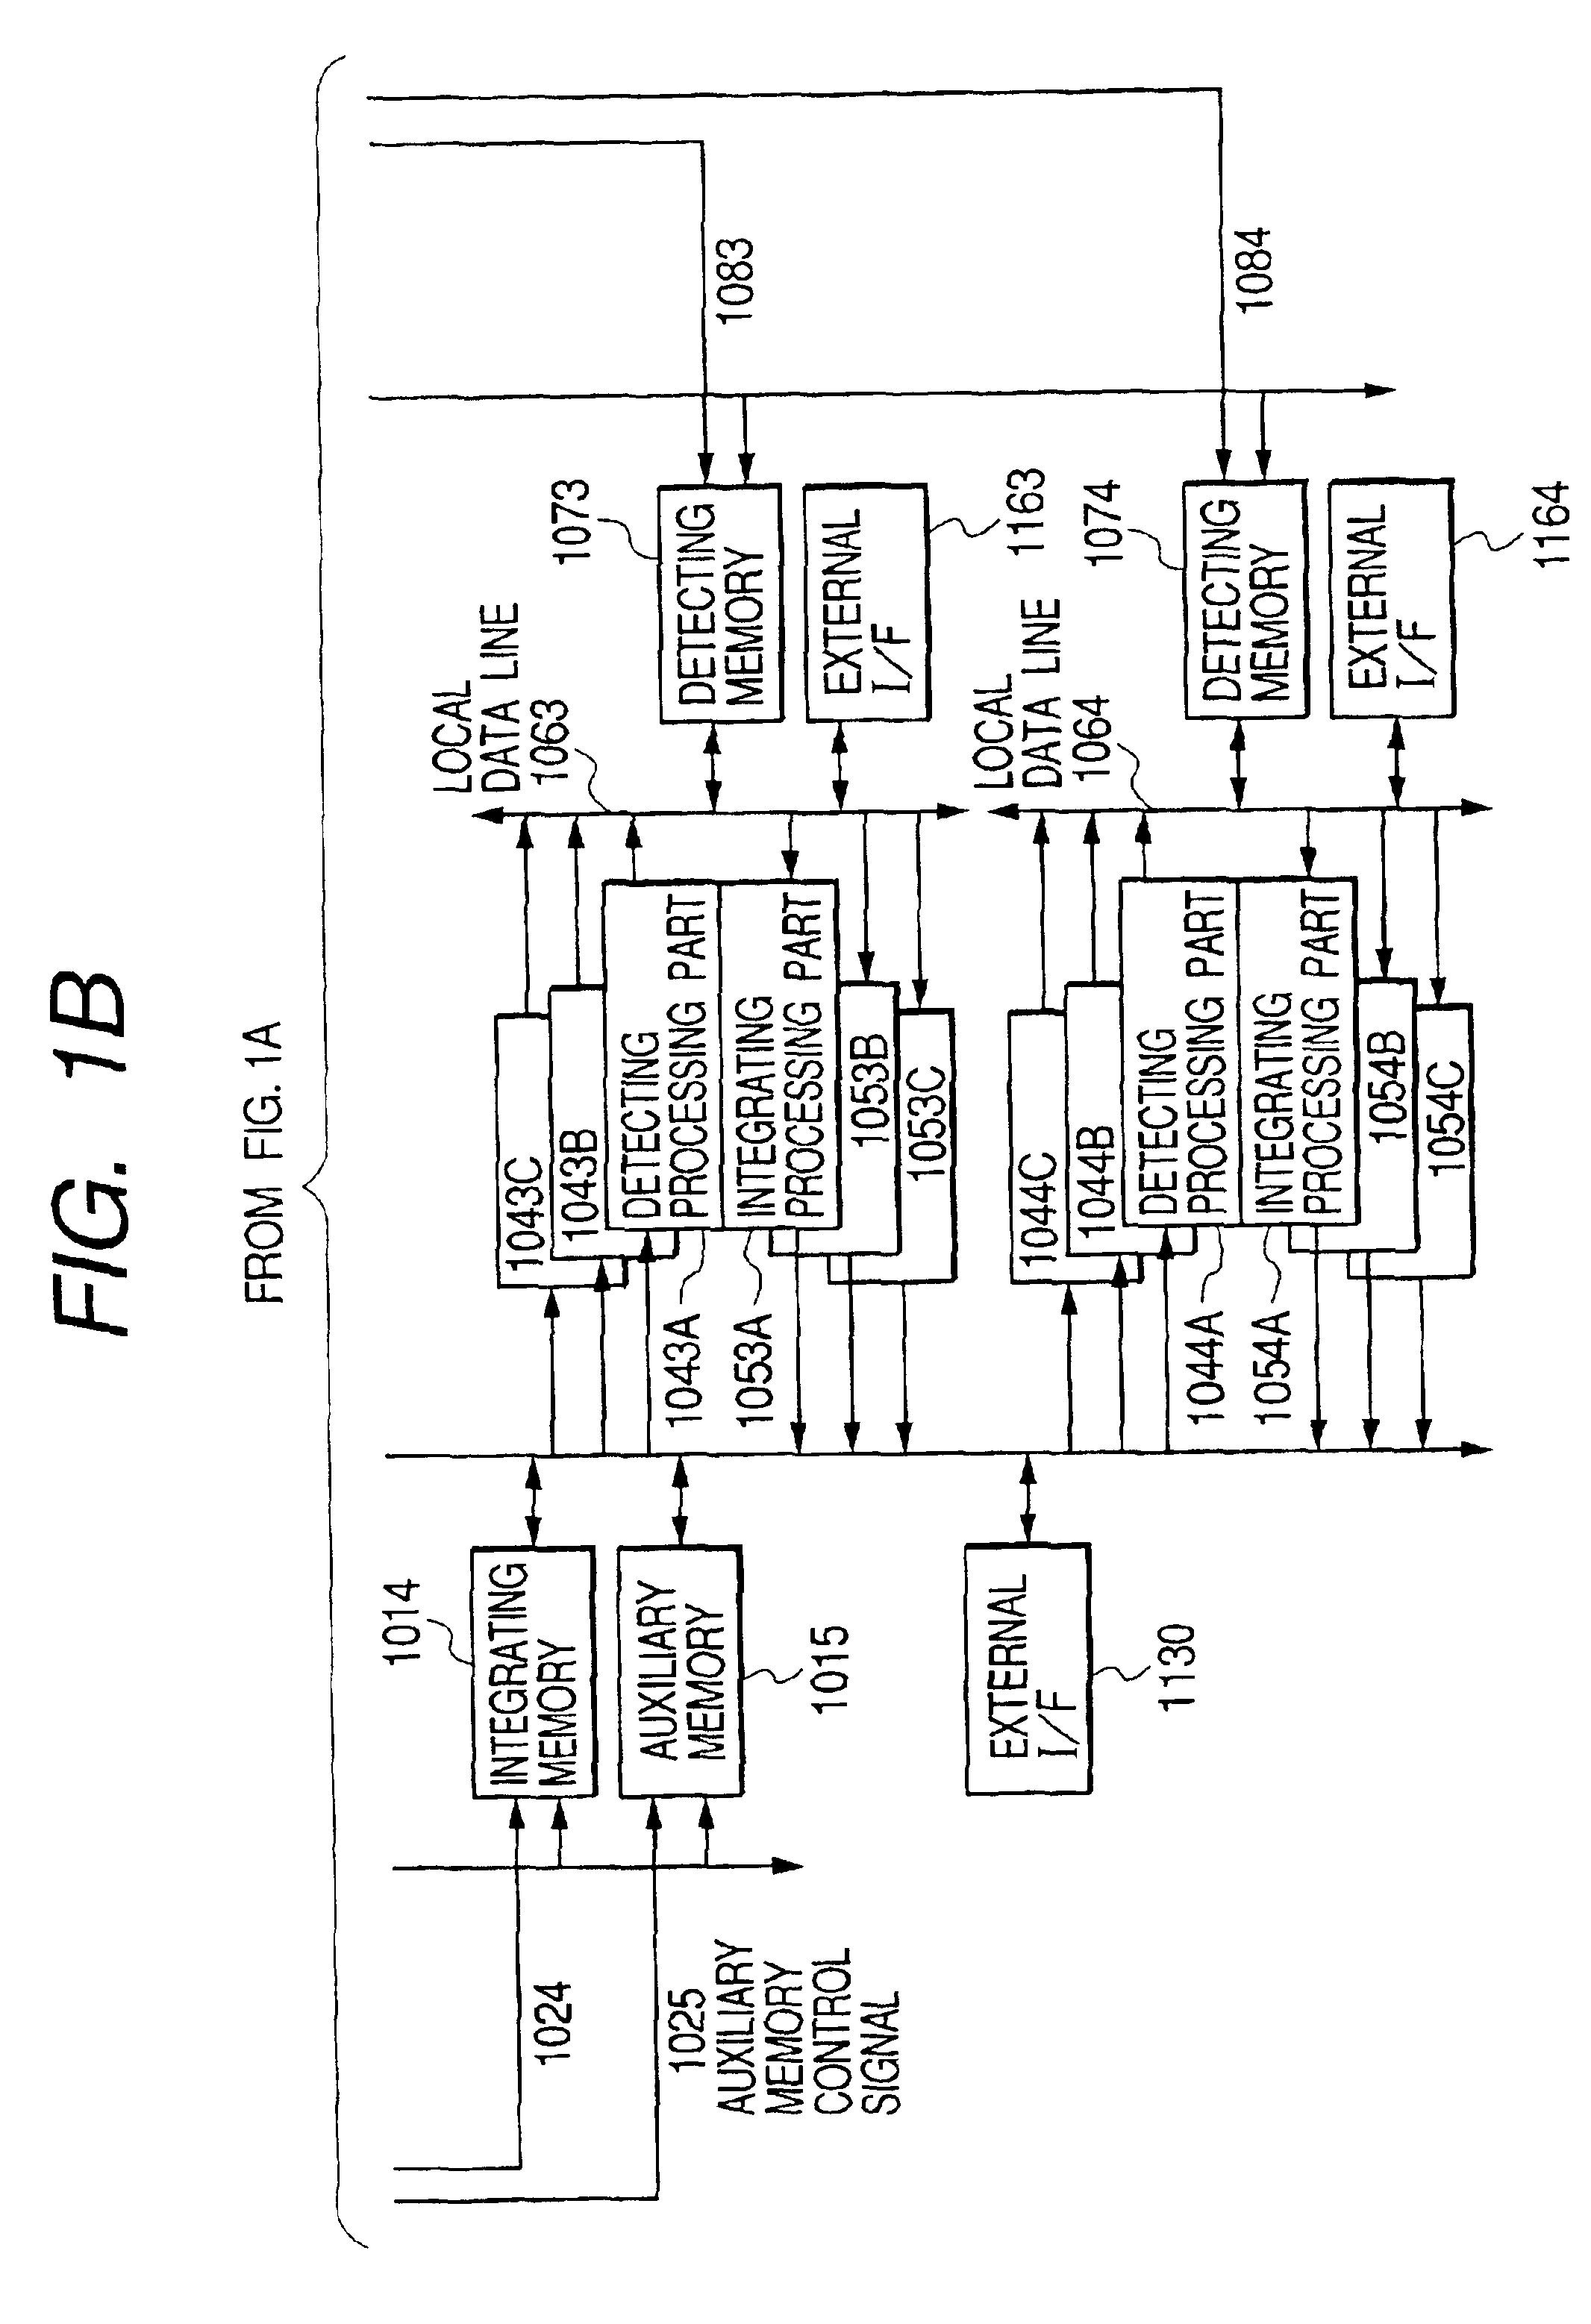 Pattern recognition apparatus for detecting predetermined pattern contained in input signal